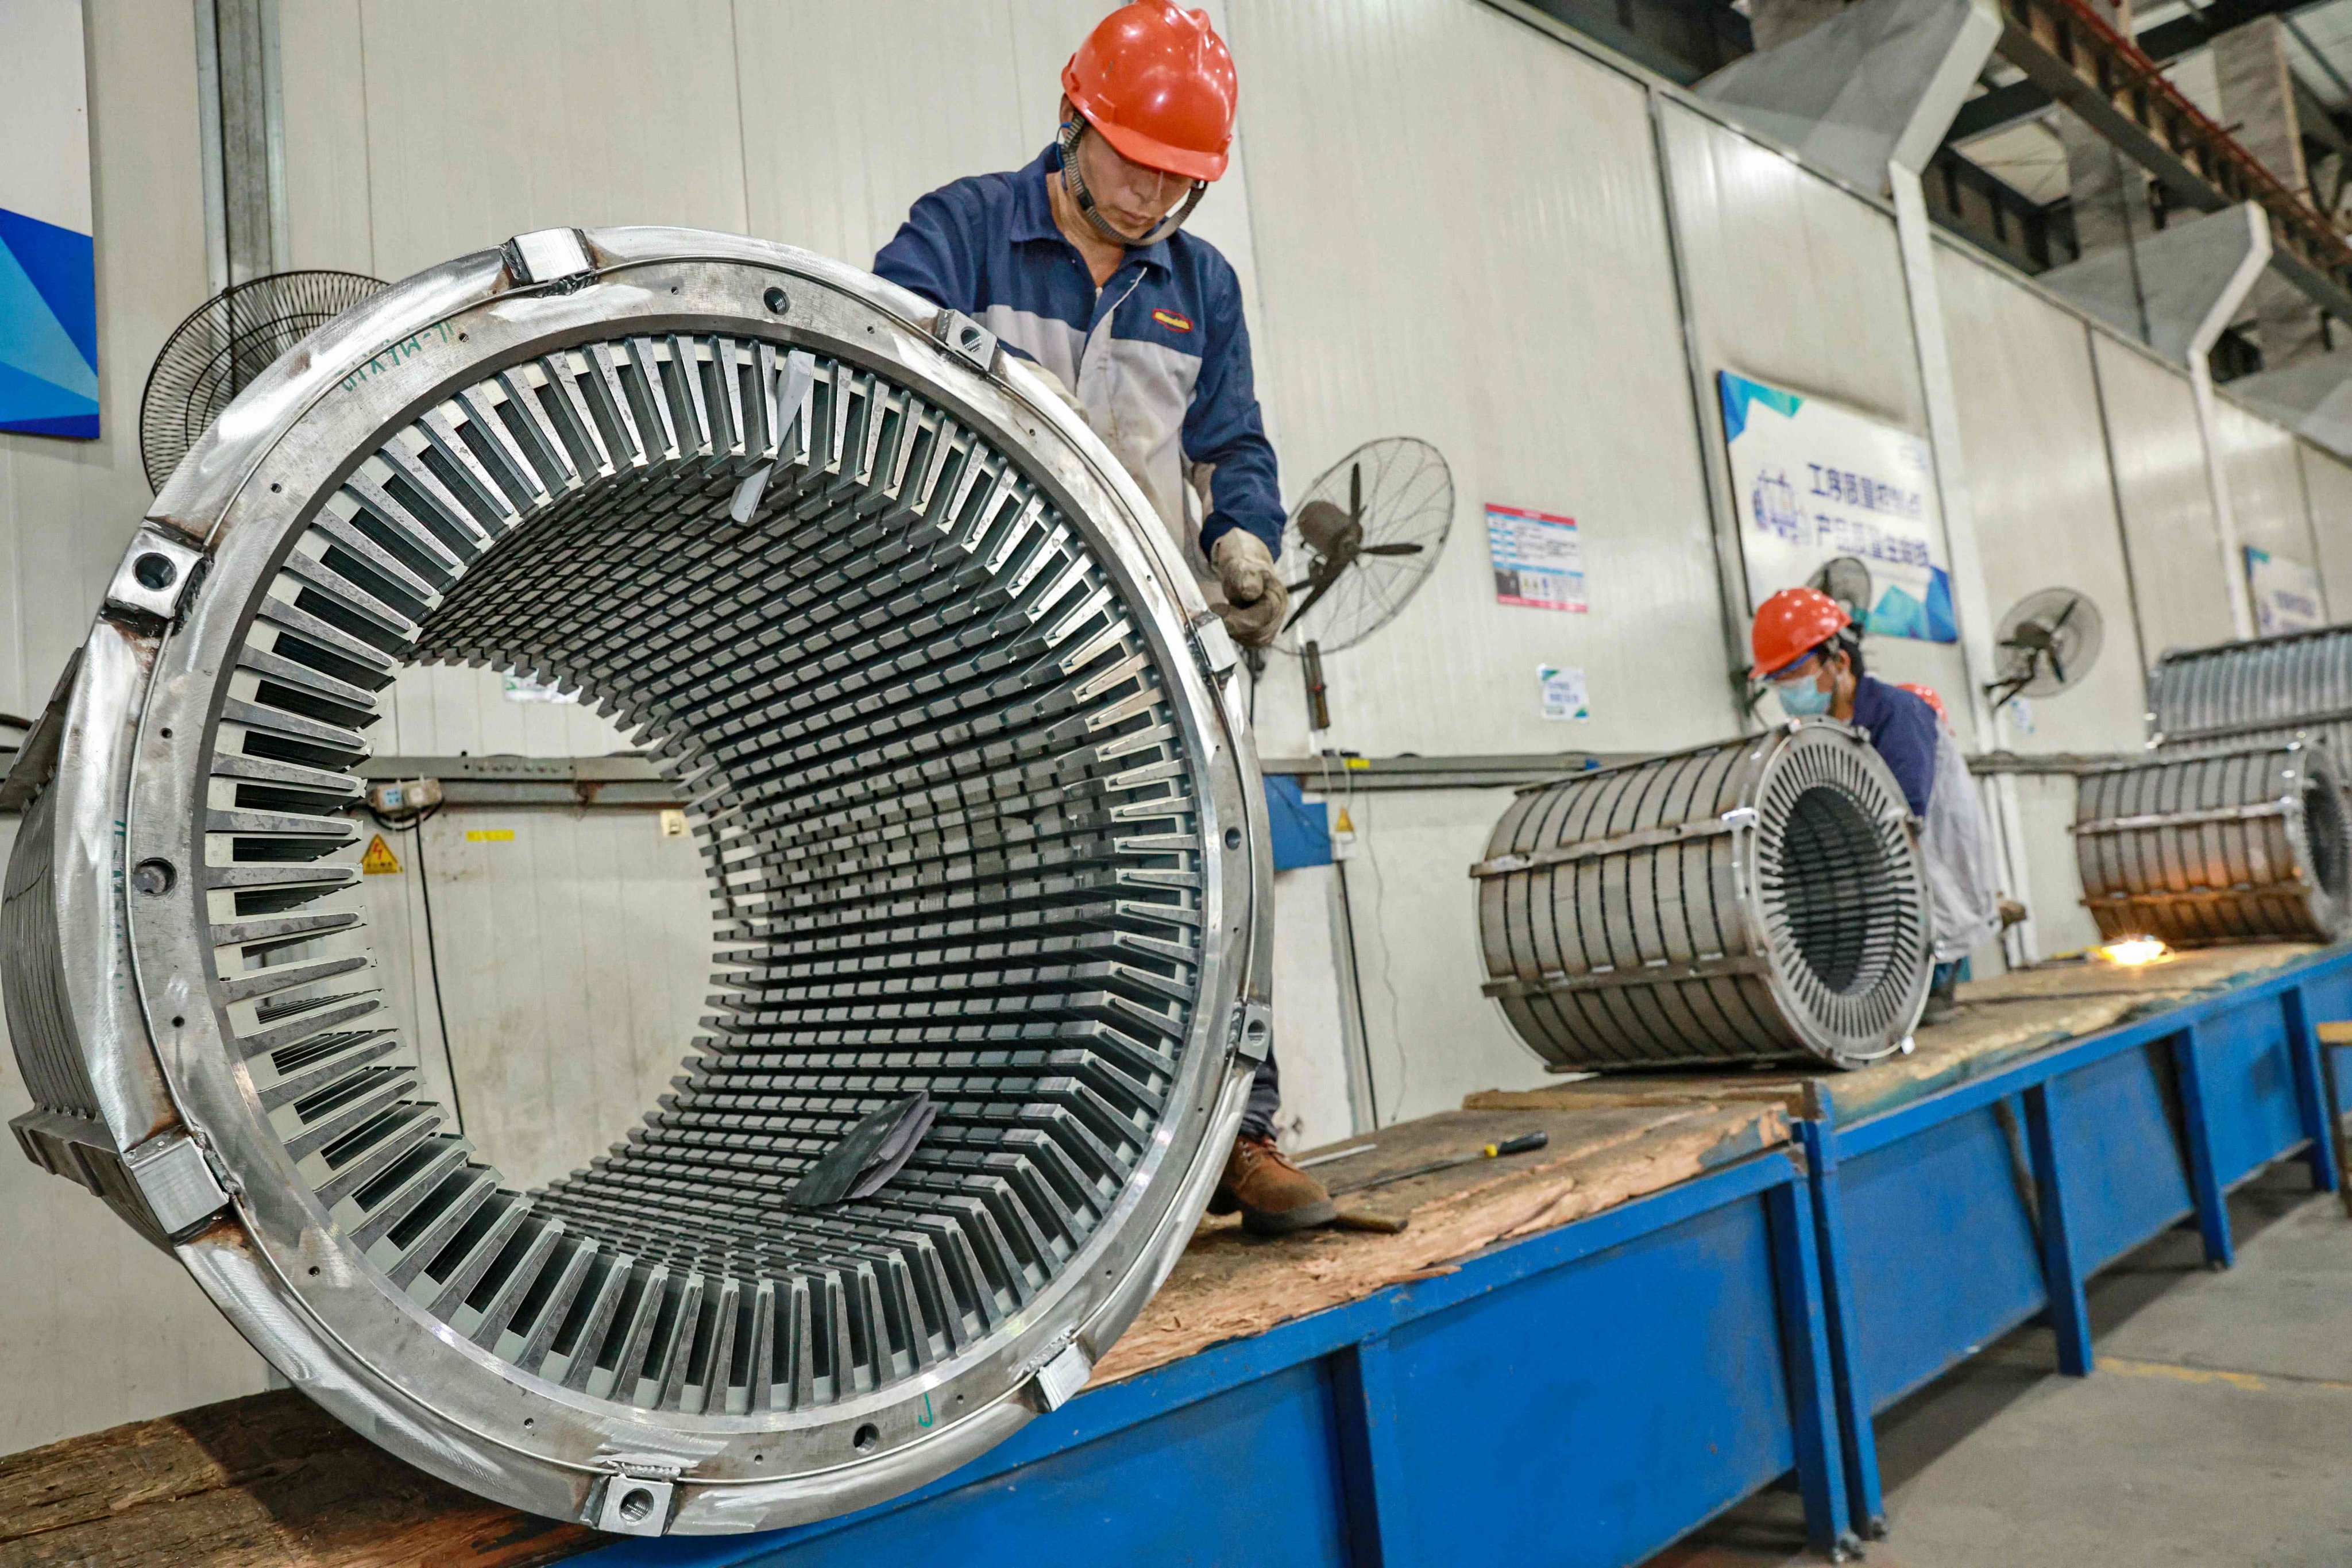 China’s industrial profits rose year-on-year in August after months of declines. Photo: AFP